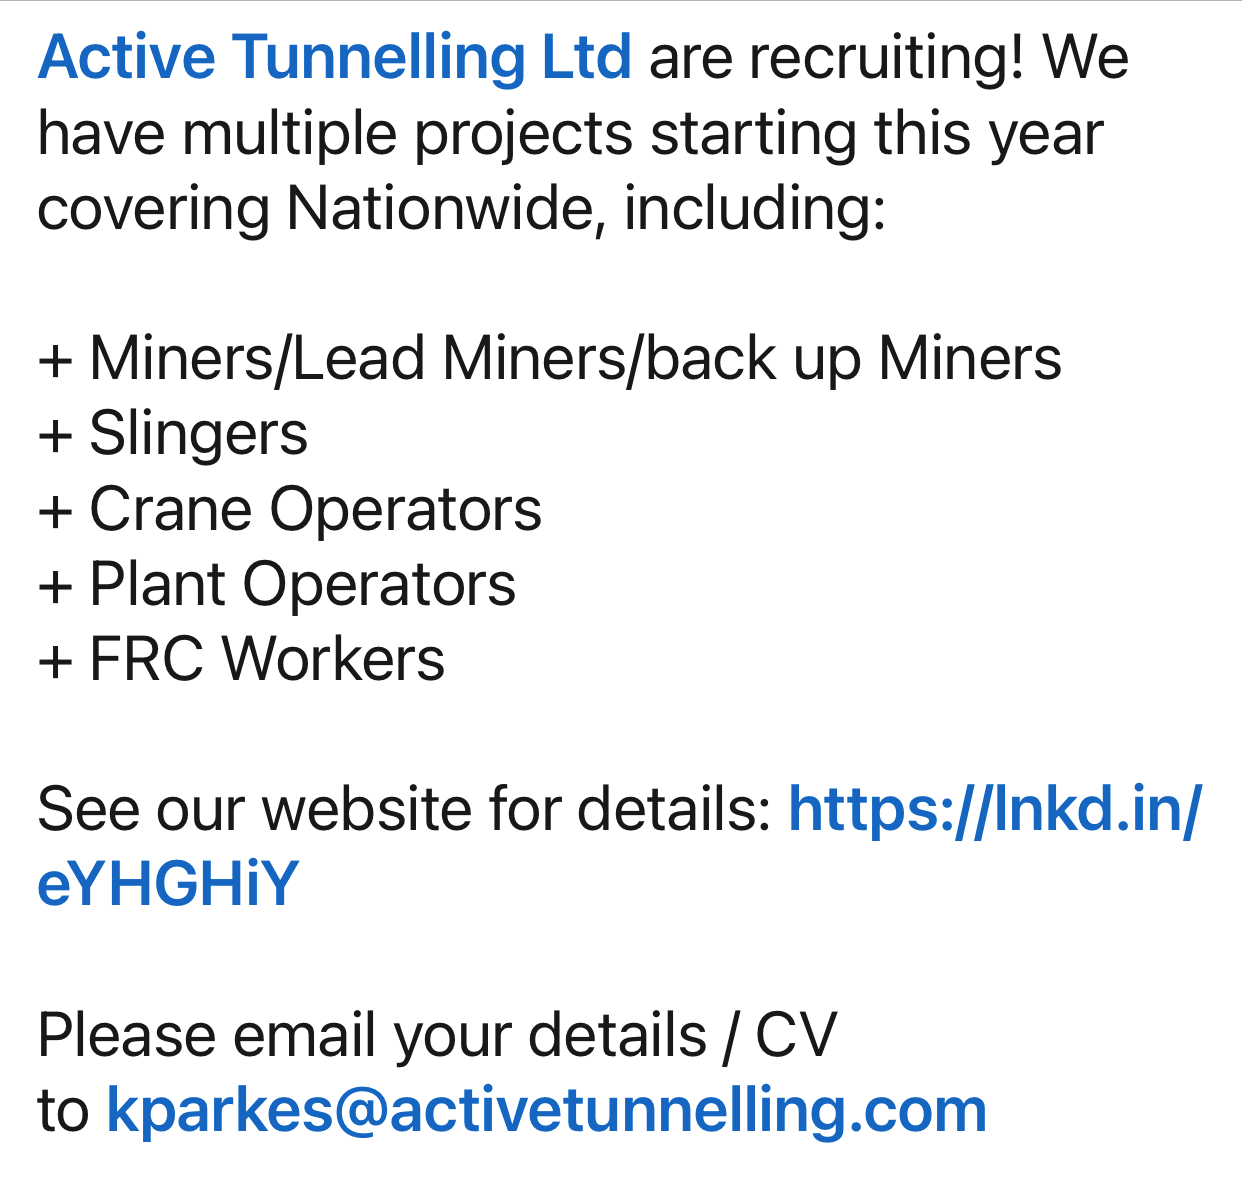 Active Tunnelling